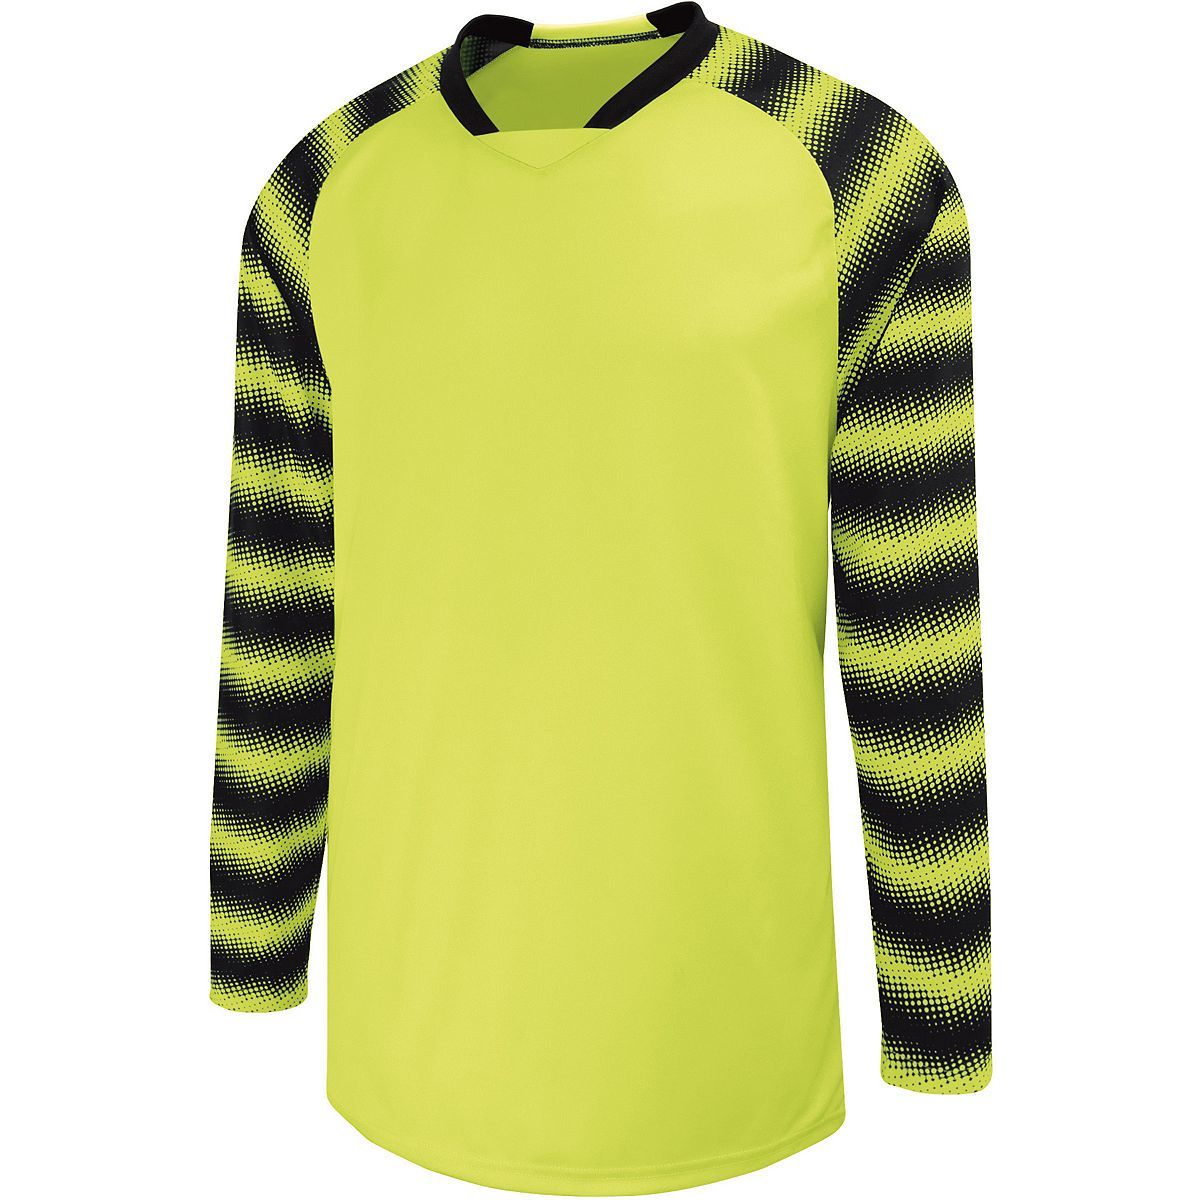 High 5 Youth Prism Goalkeeper Jersey